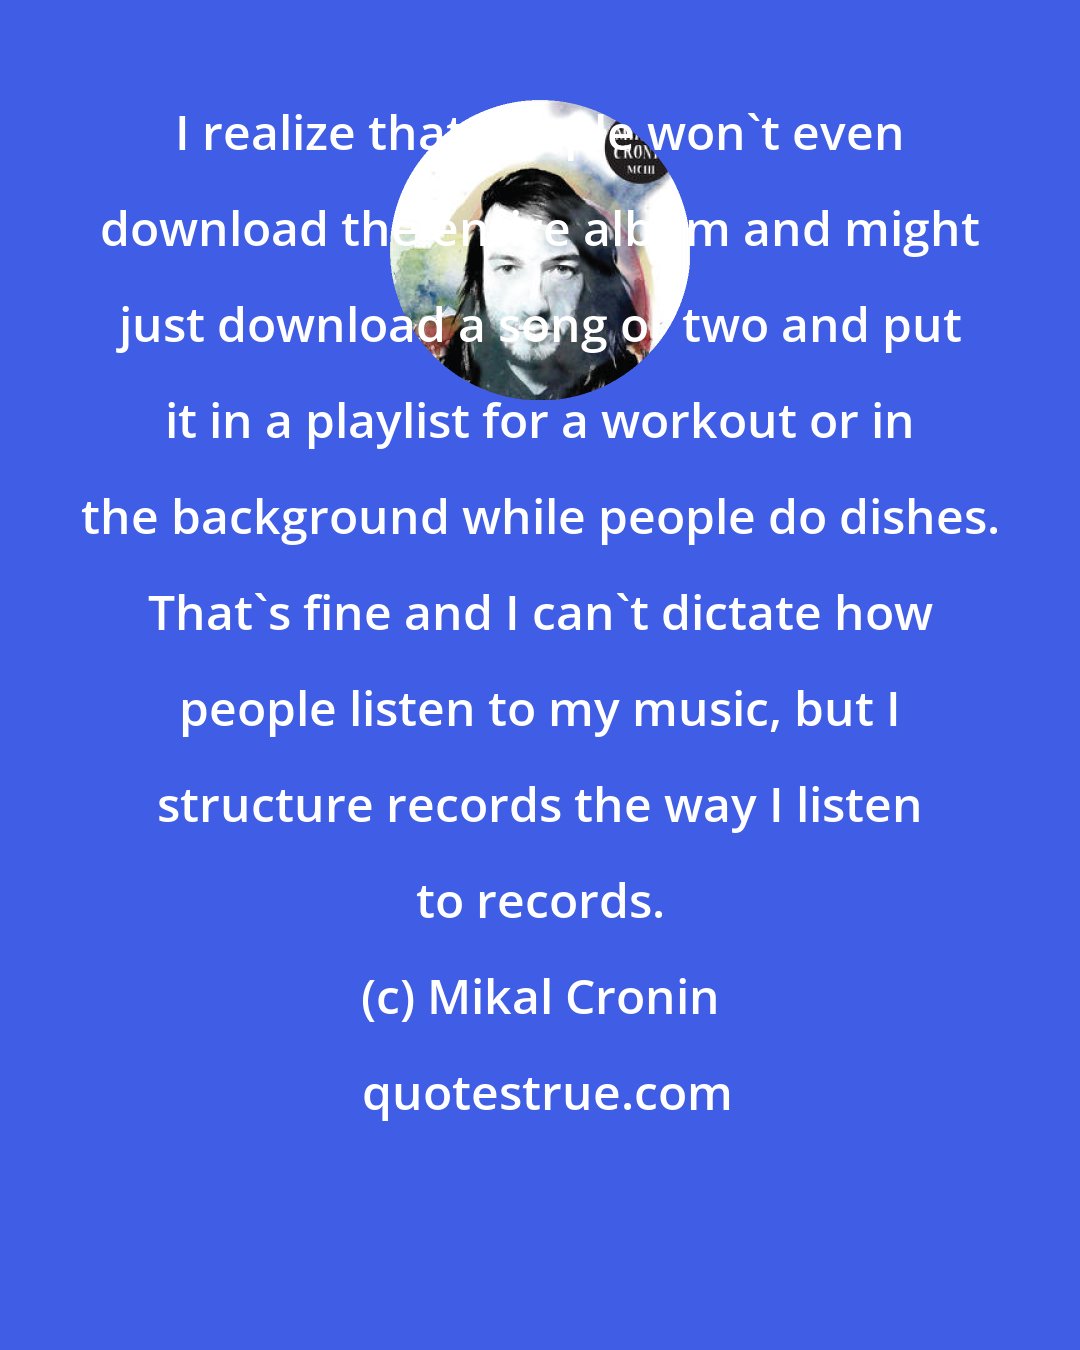 Mikal Cronin: I realize that people won't even download the entire album and might just download a song or two and put it in a playlist for a workout or in the background while people do dishes. That's fine and I can't dictate how people listen to my music, but I structure records the way I listen to records.